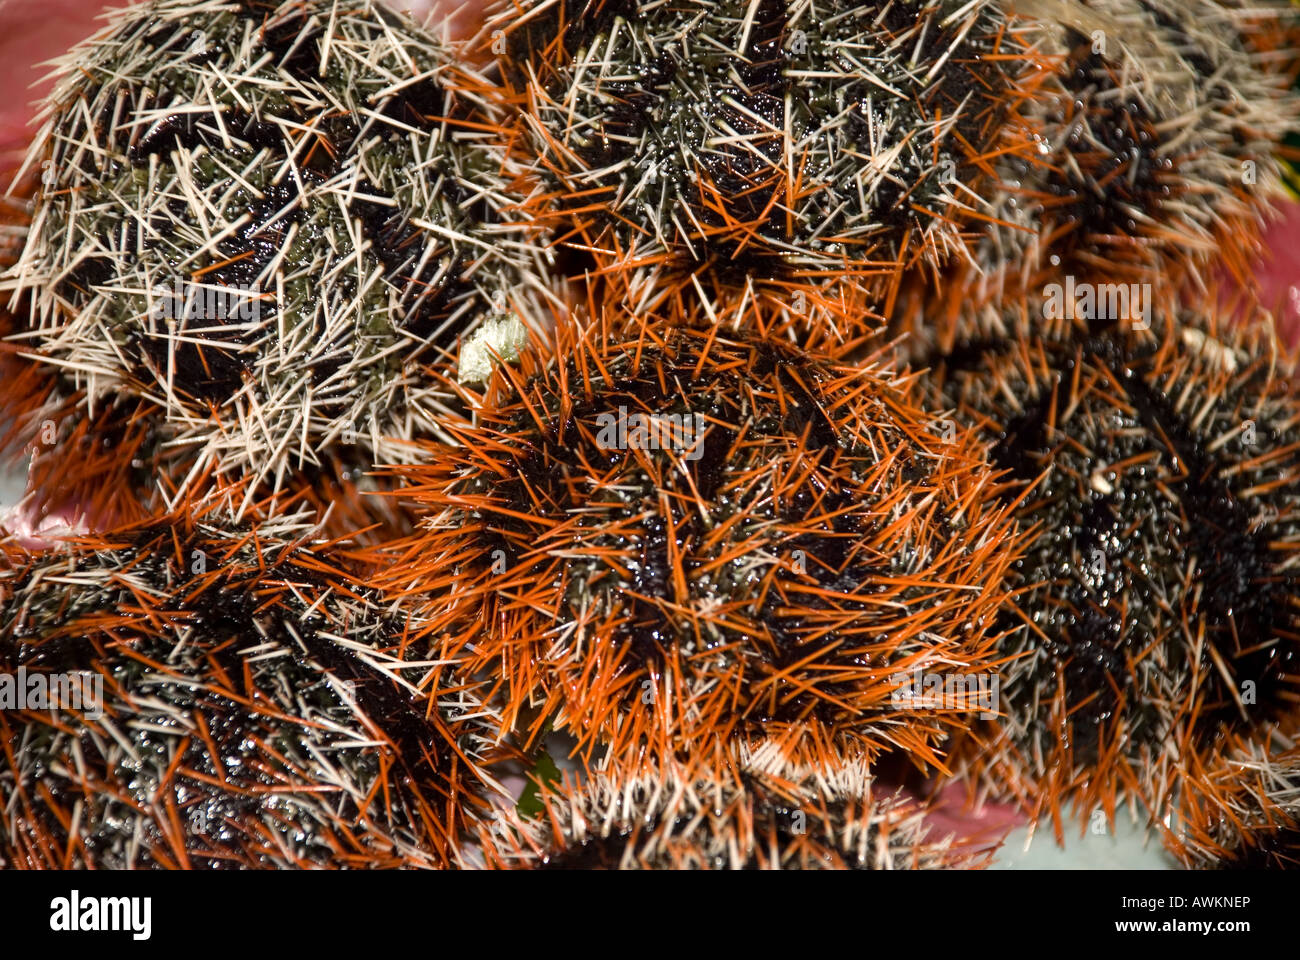 philippines island siquijor town sea urchins in market Stock Photo